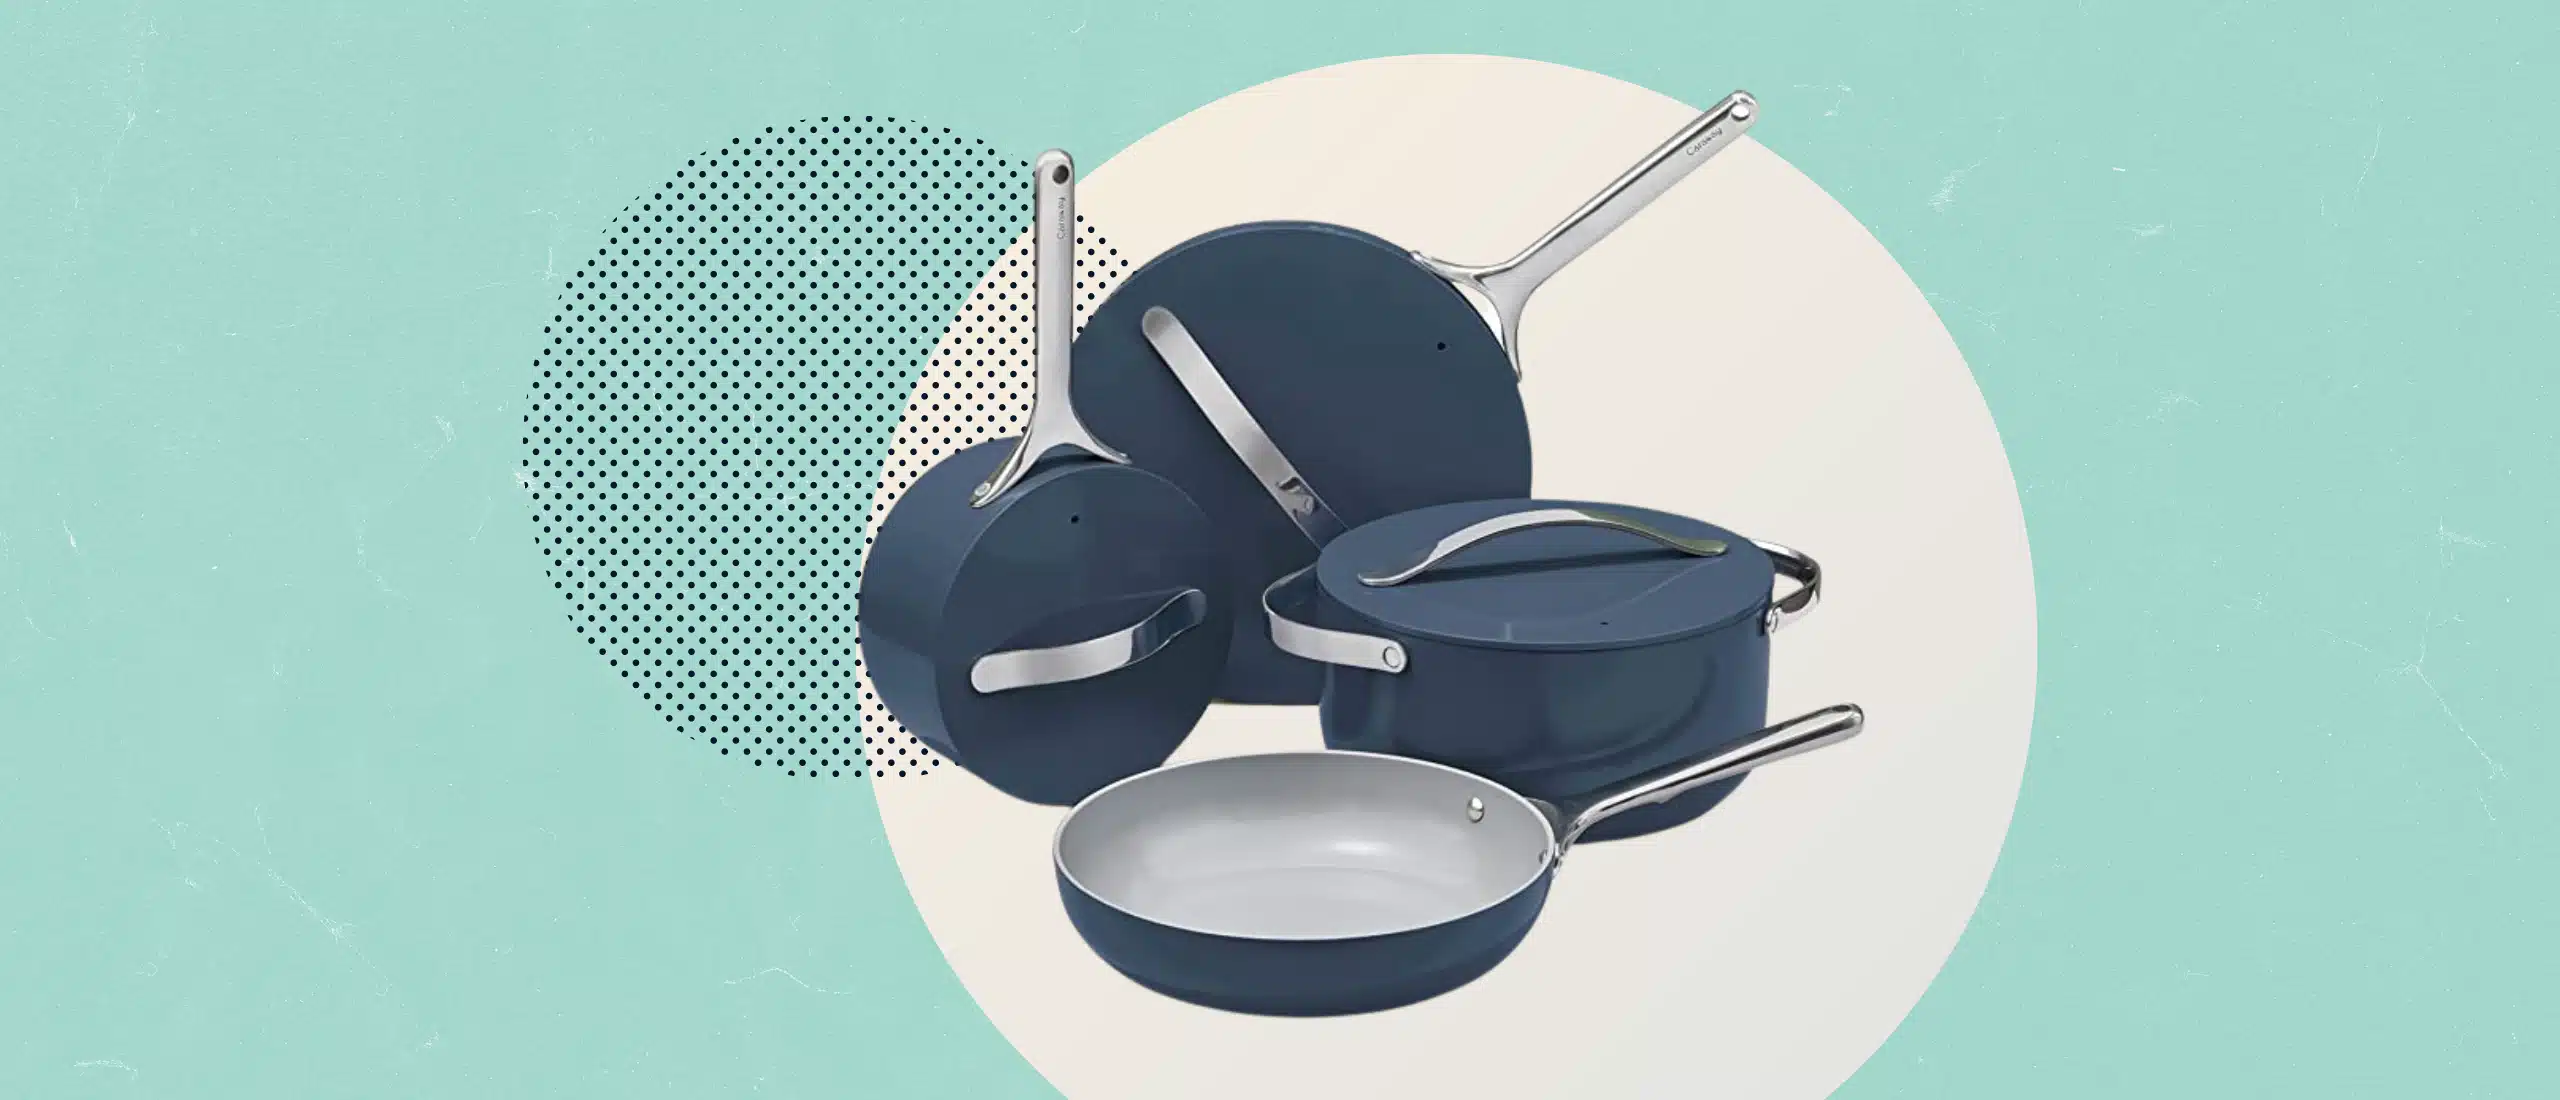 pots and pans on a teal and white background